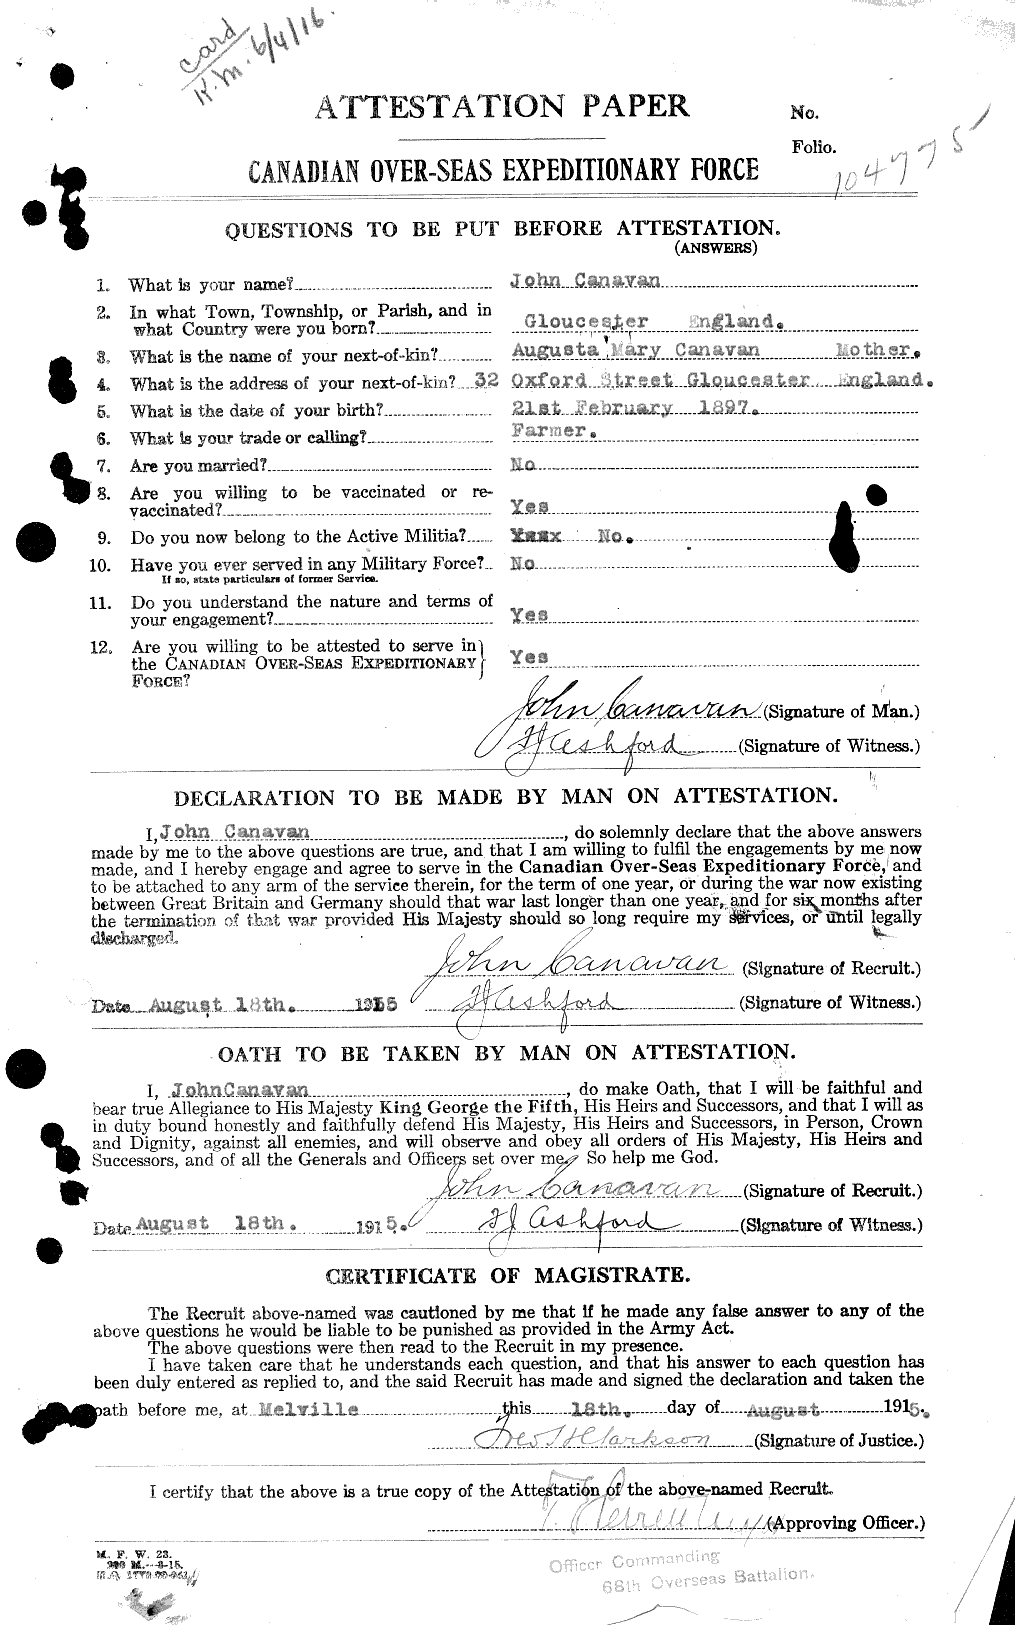 Personnel Records of the First World War - CEF 004162a